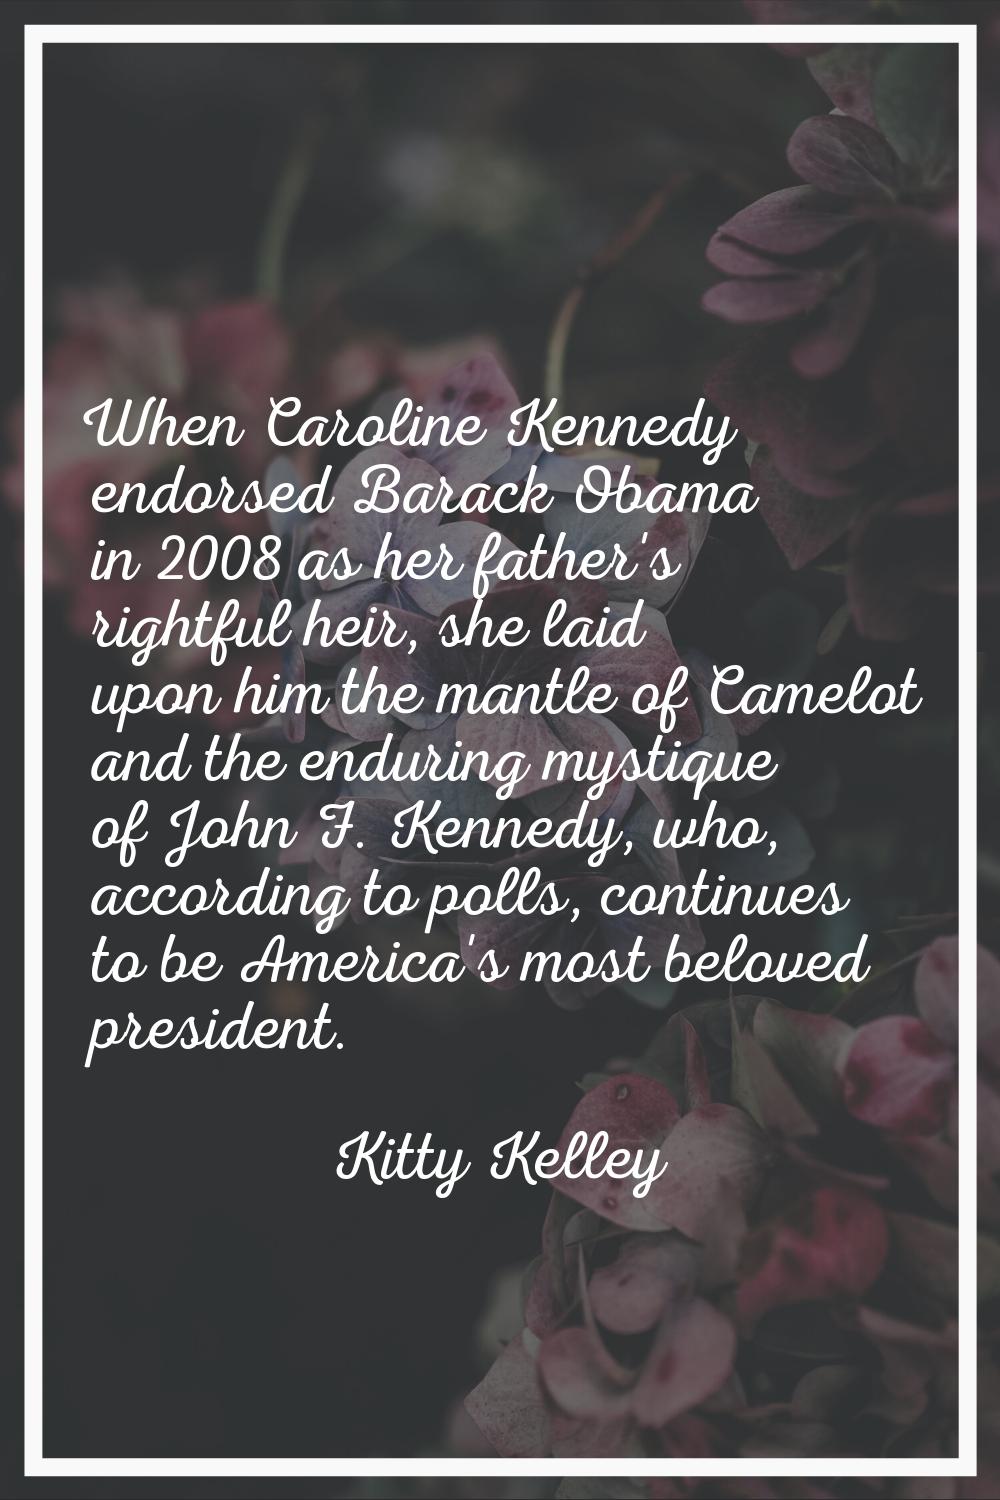 When Caroline Kennedy endorsed Barack Obama in 2008 as her father's rightful heir, she laid upon hi